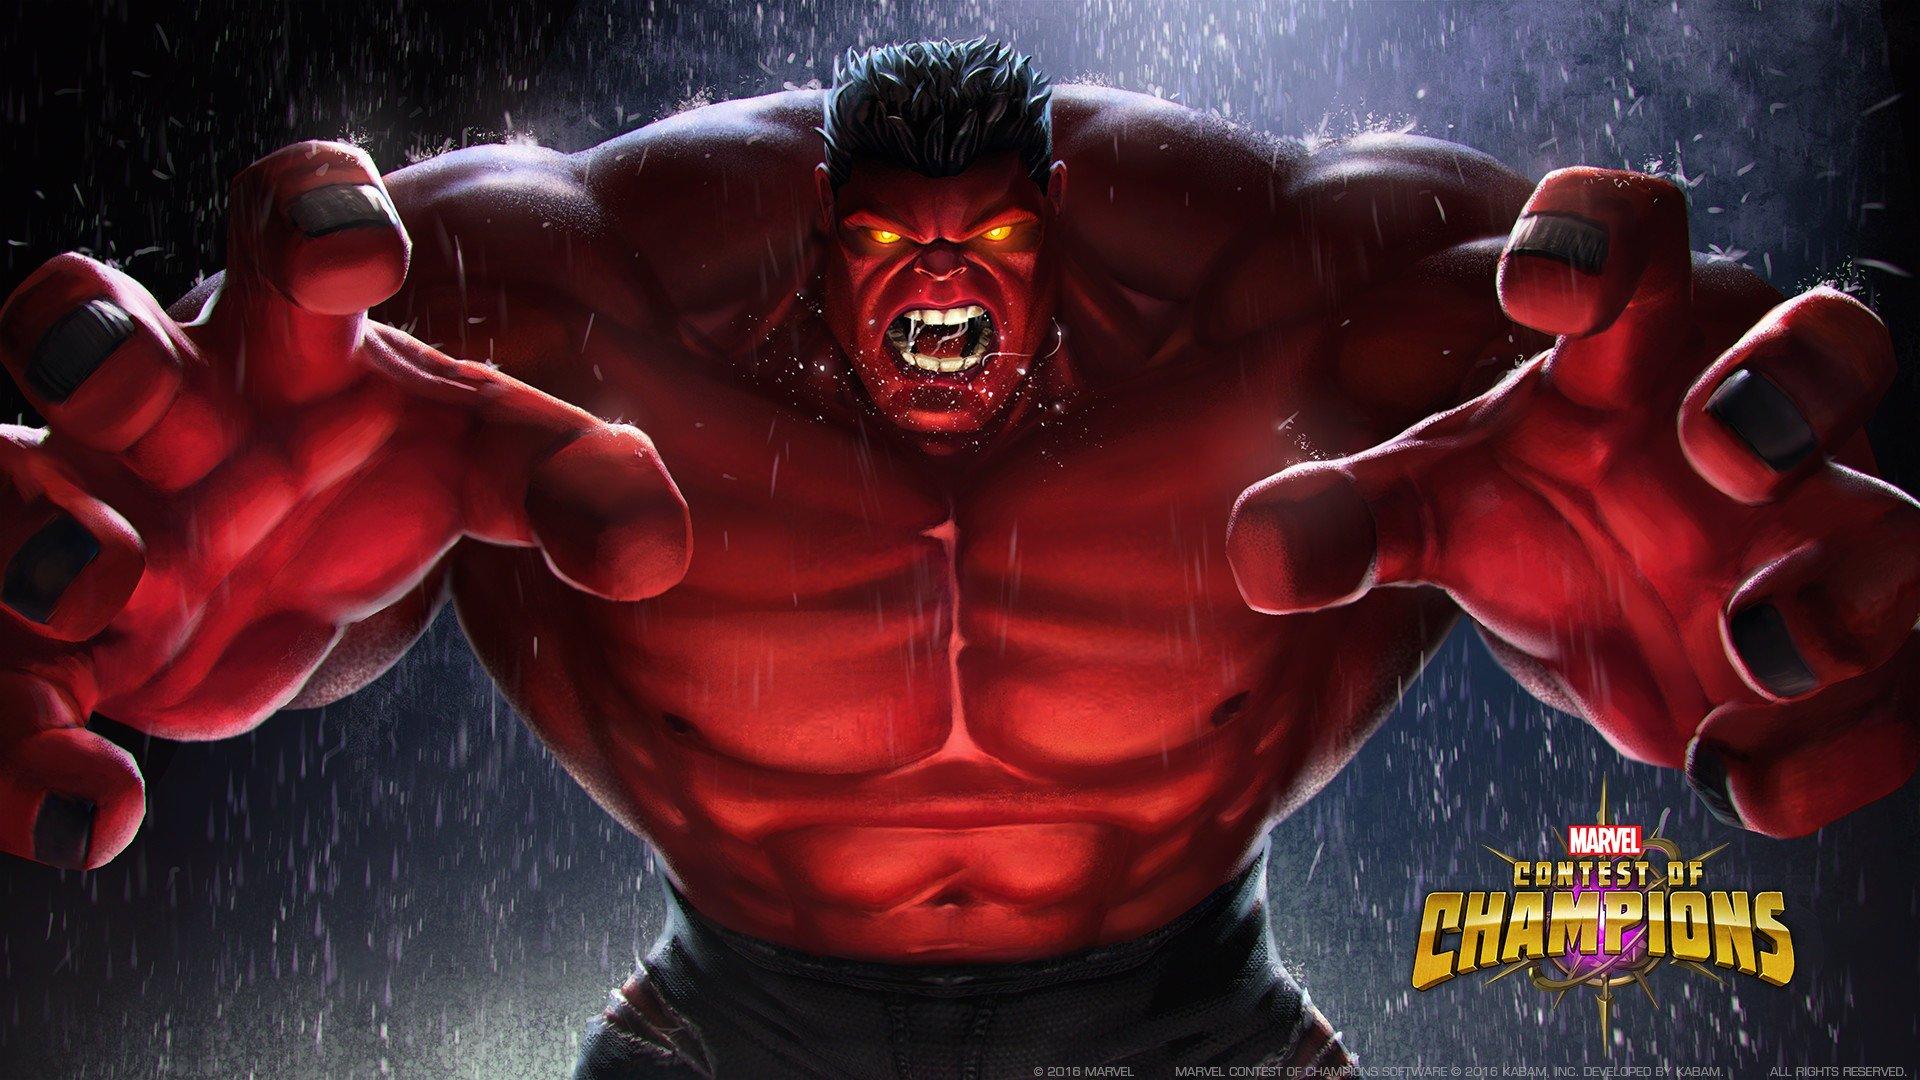 MARVEL Contest of Champions HD Wallpaper. Background Image